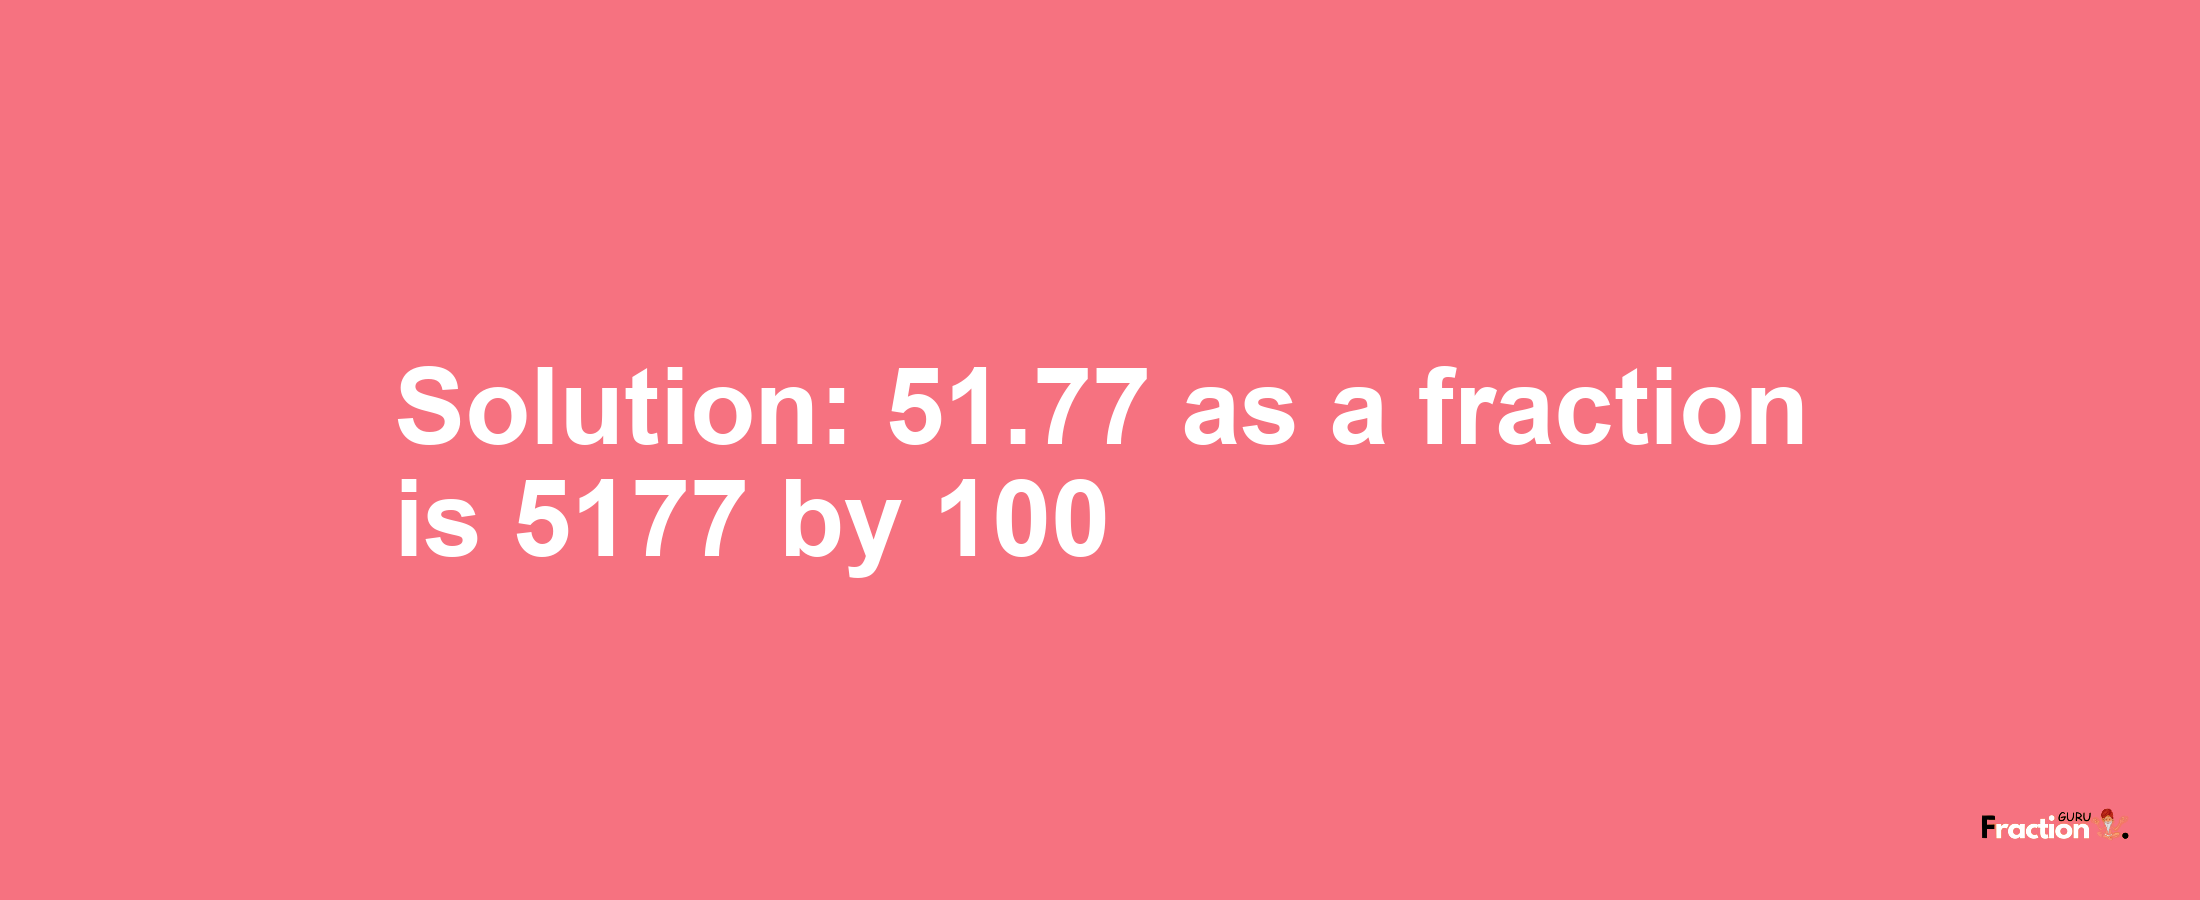 Solution:51.77 as a fraction is 5177/100